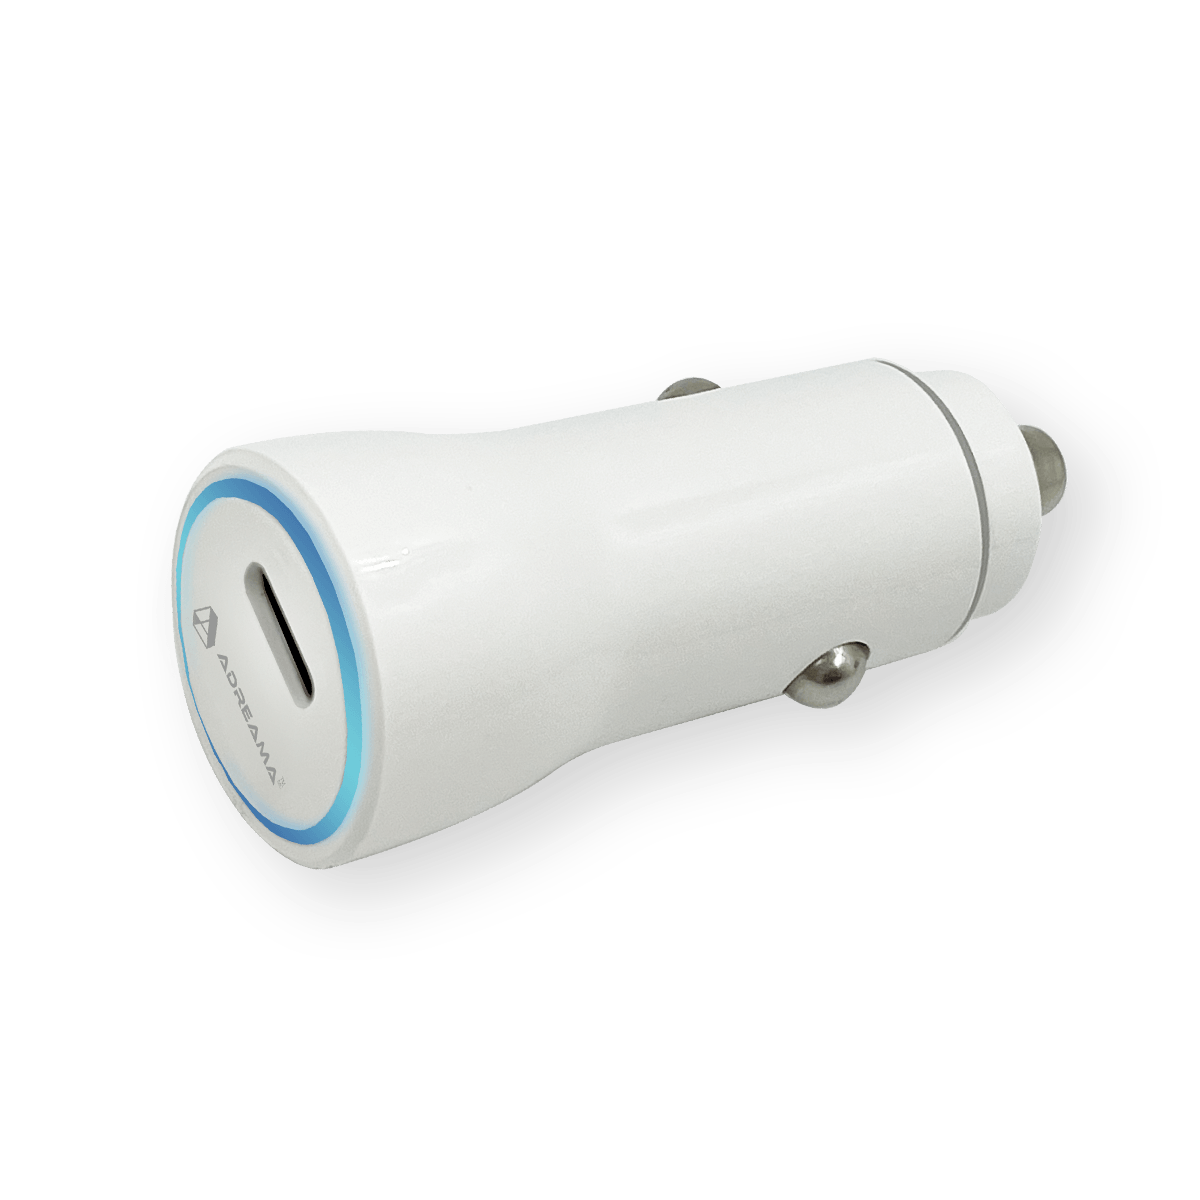 Maximize Your Car Charging Speed with the Adreama PD 20W Car Charger